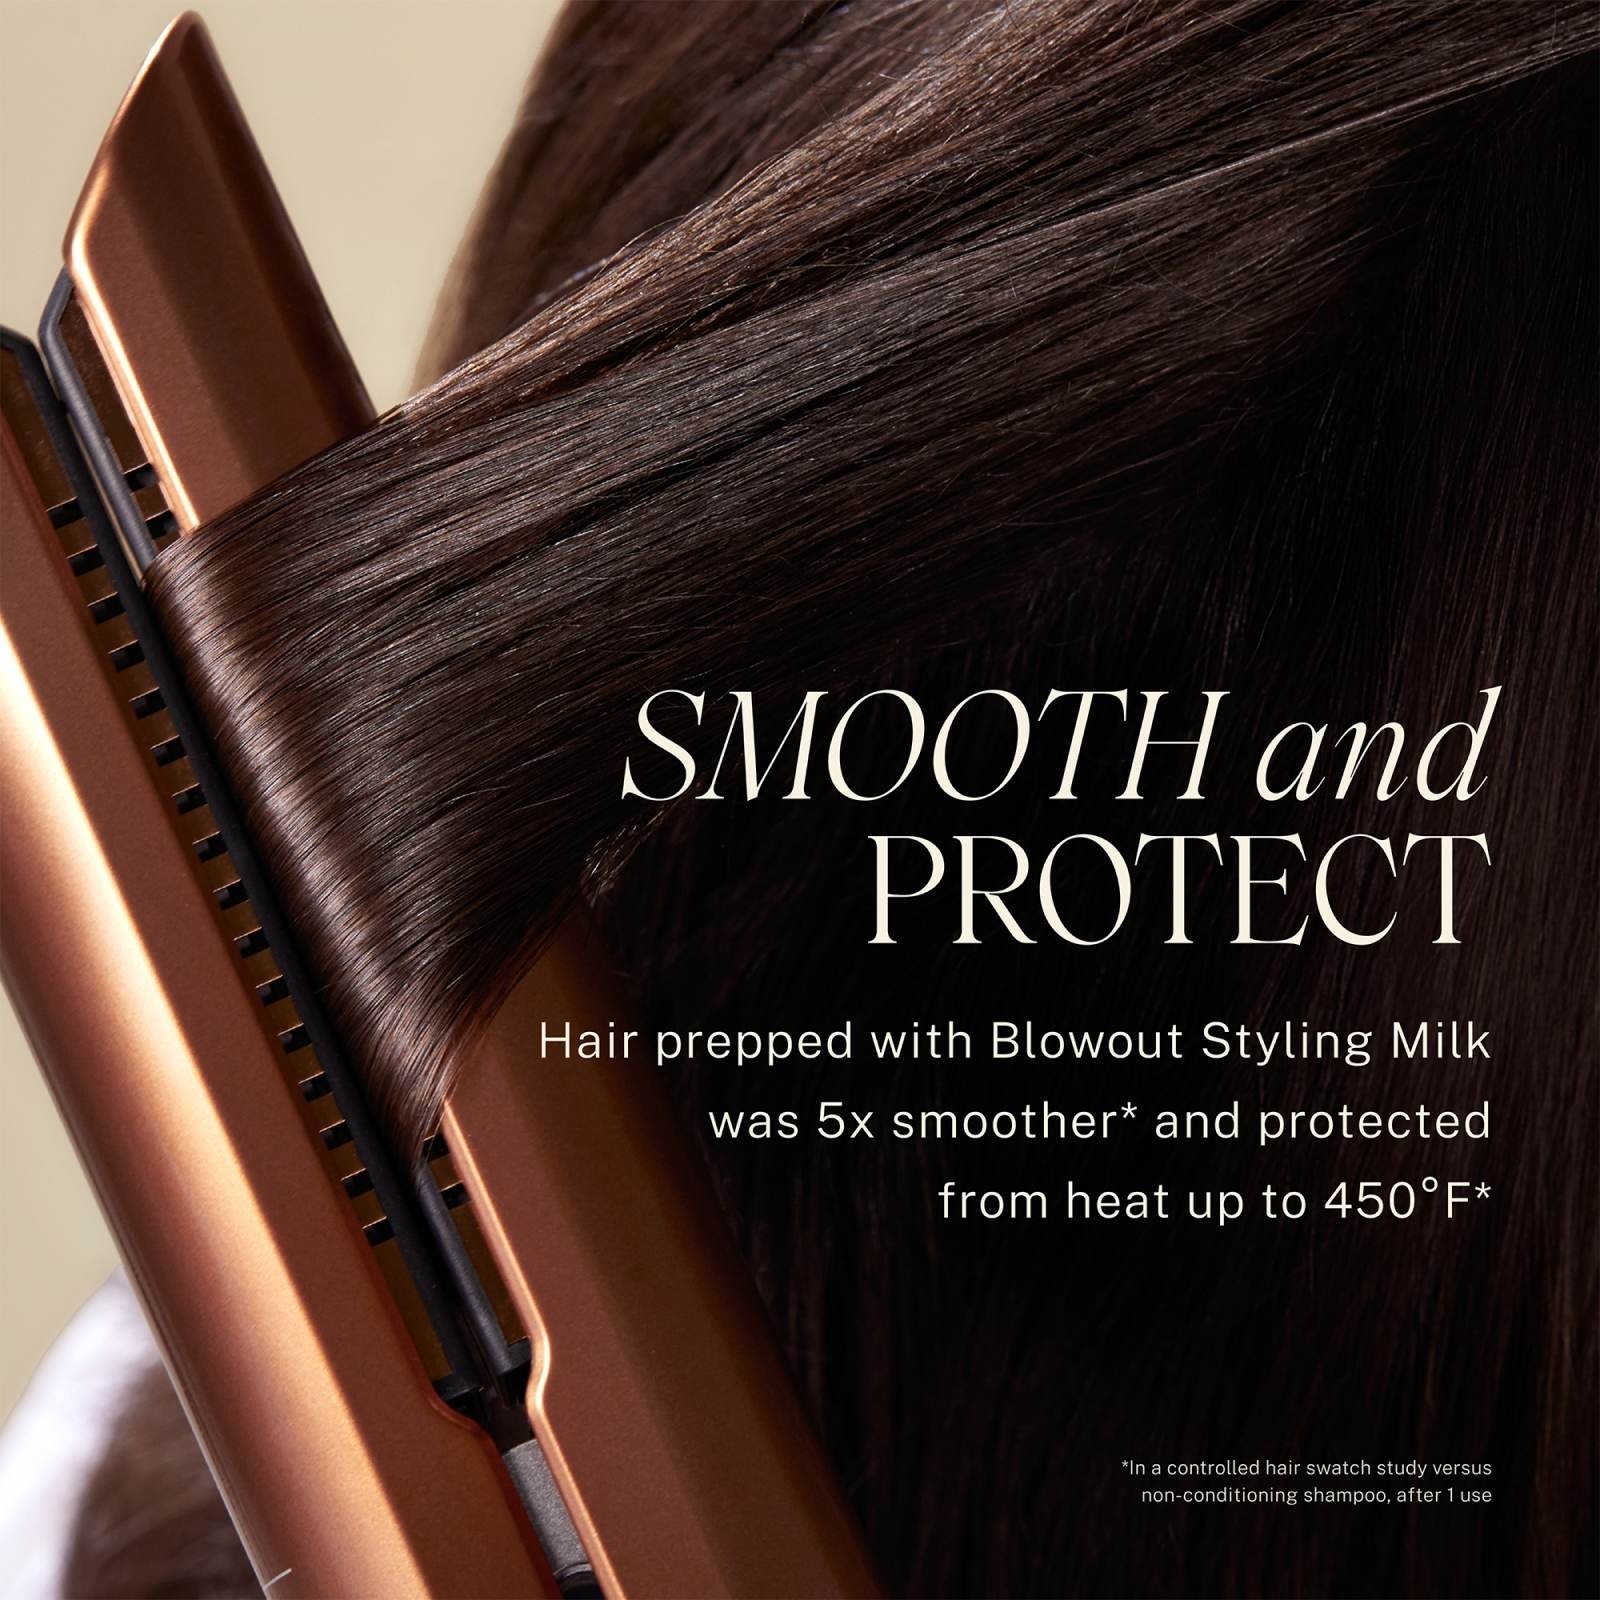 Smooth and protect Hair prepped with Blowout Styling Milk was 5 times smoother and protected from heat up to 450 degrees